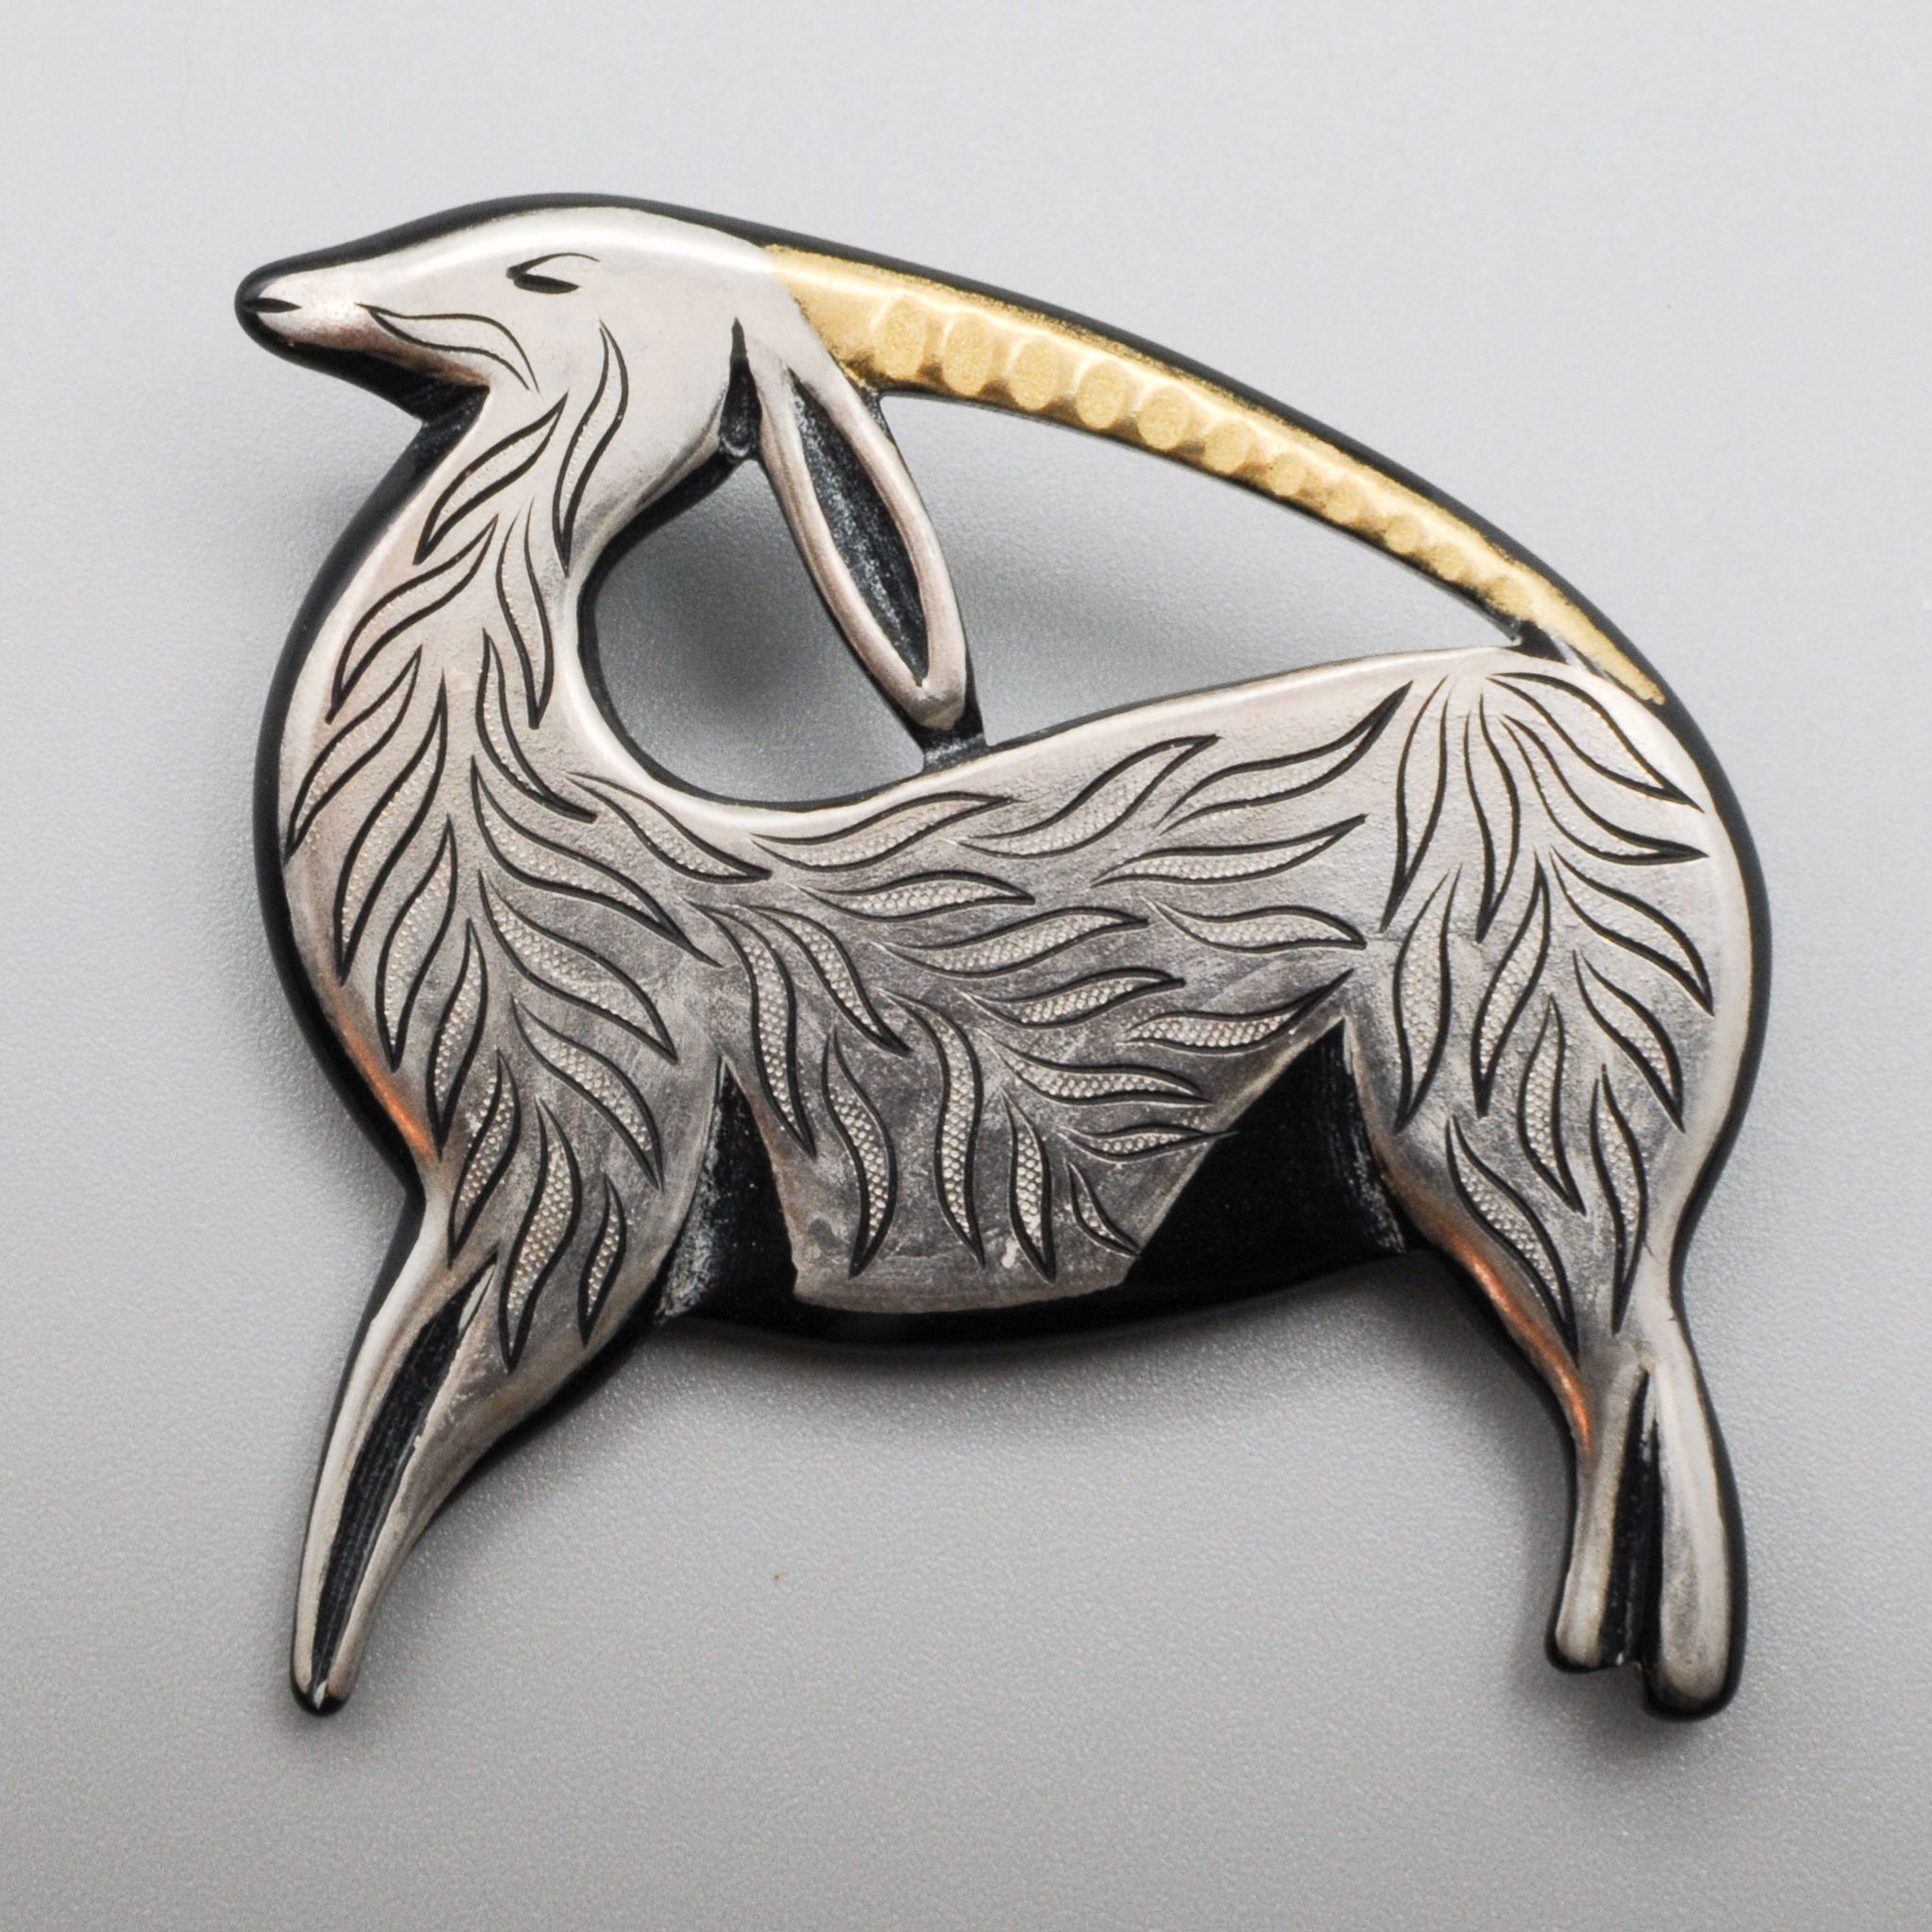 French+Silvered+Galalith+Deco+Gazelle+or+Antelope+Pin picture 1